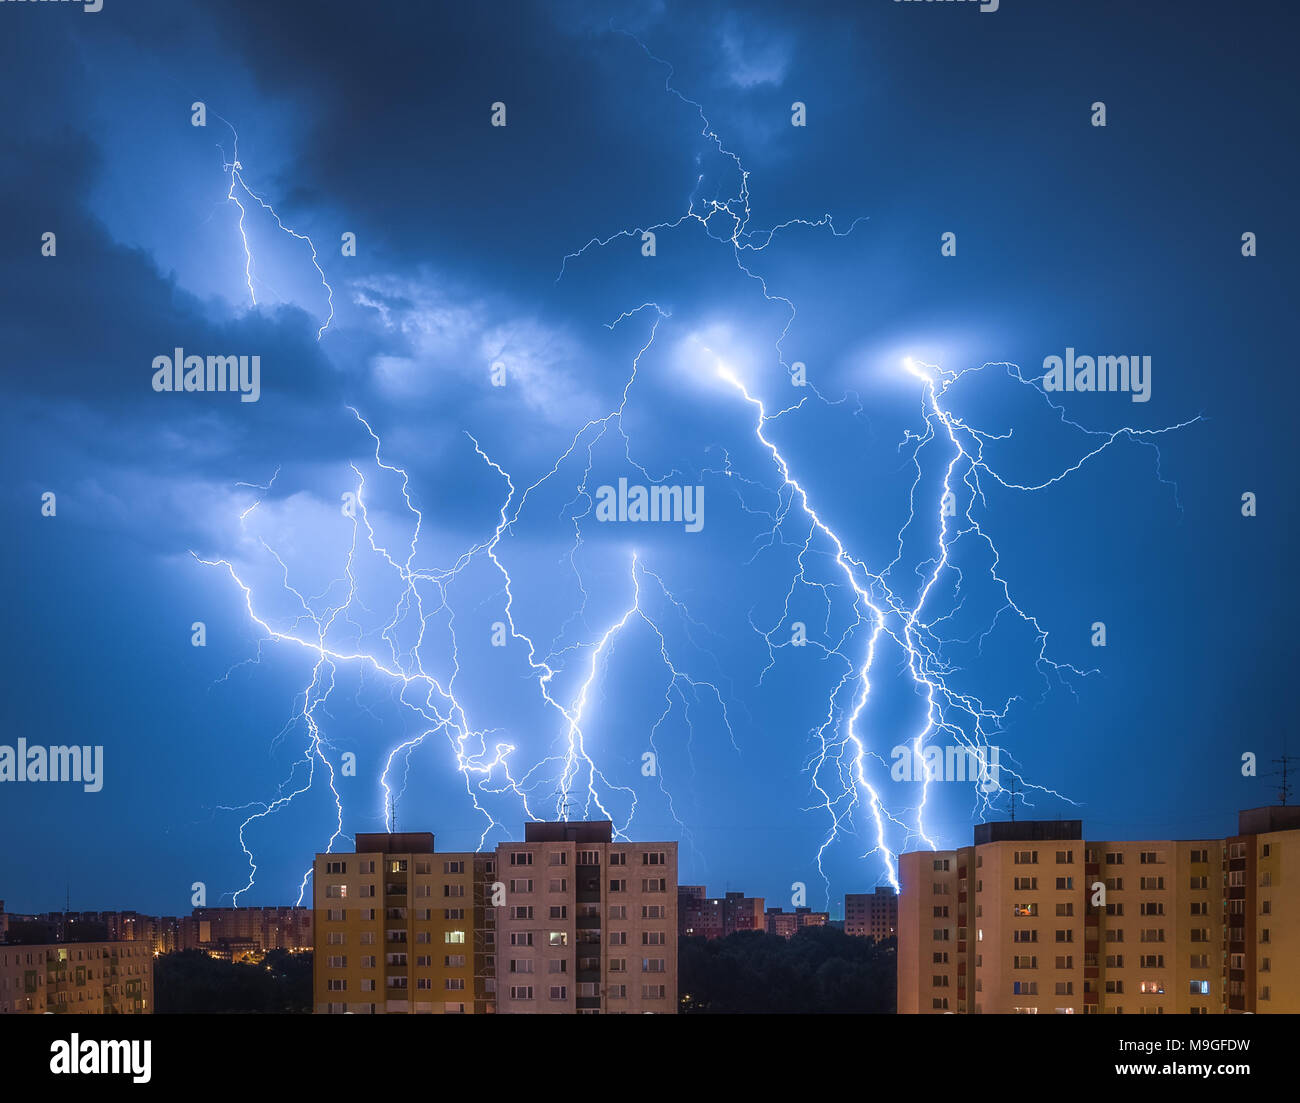 Many Lightnings Over Housing Estate. Night Storm in the City. Stock Photo